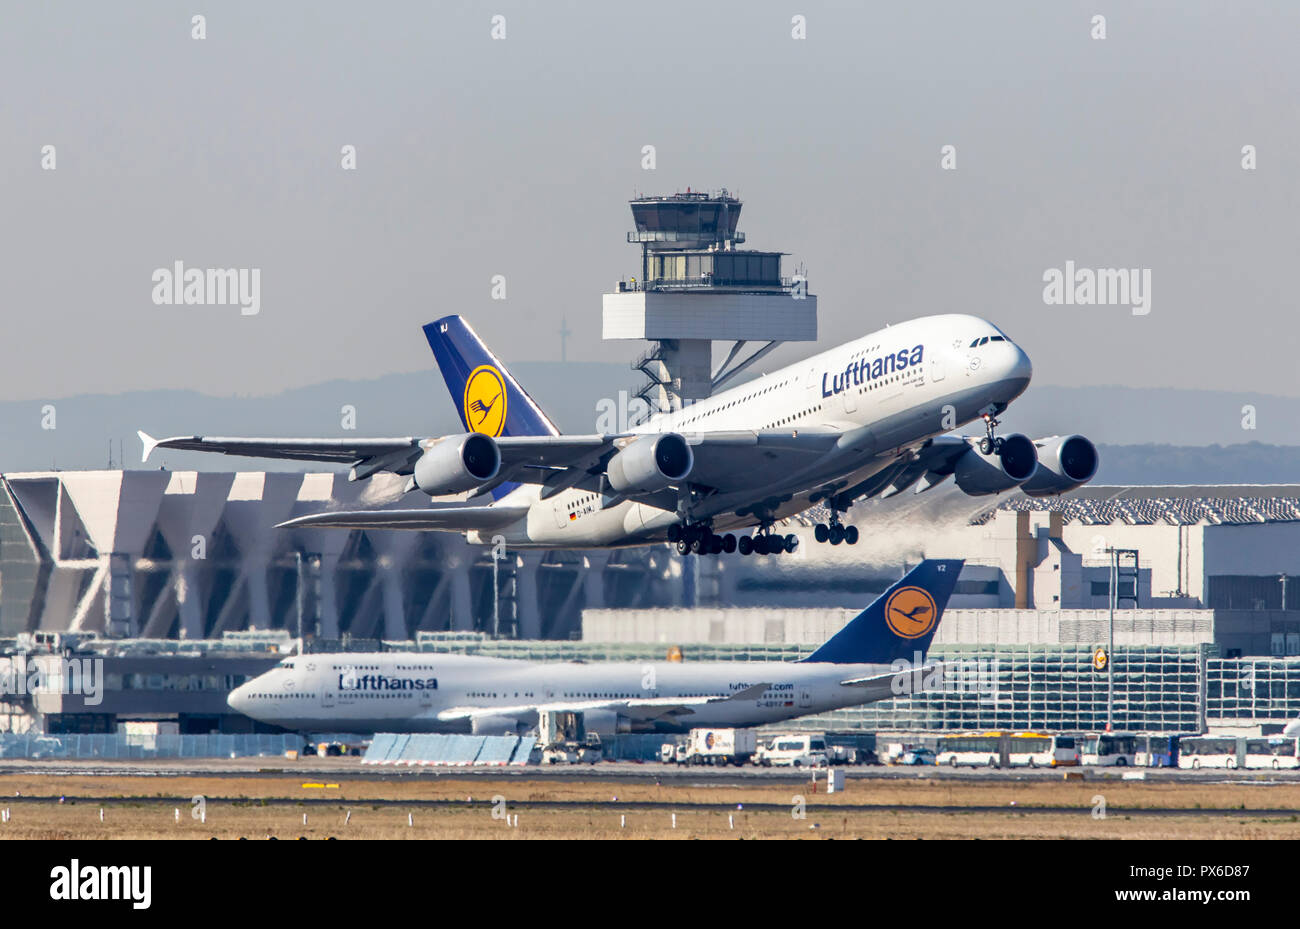 Frankfurt / Main Airport, FRA, Fraport, Air Traffic Control Tower, Lufthansa Boeing 747 on taxi way, Lufthansa Airbus A380 at take-off Stock Photo